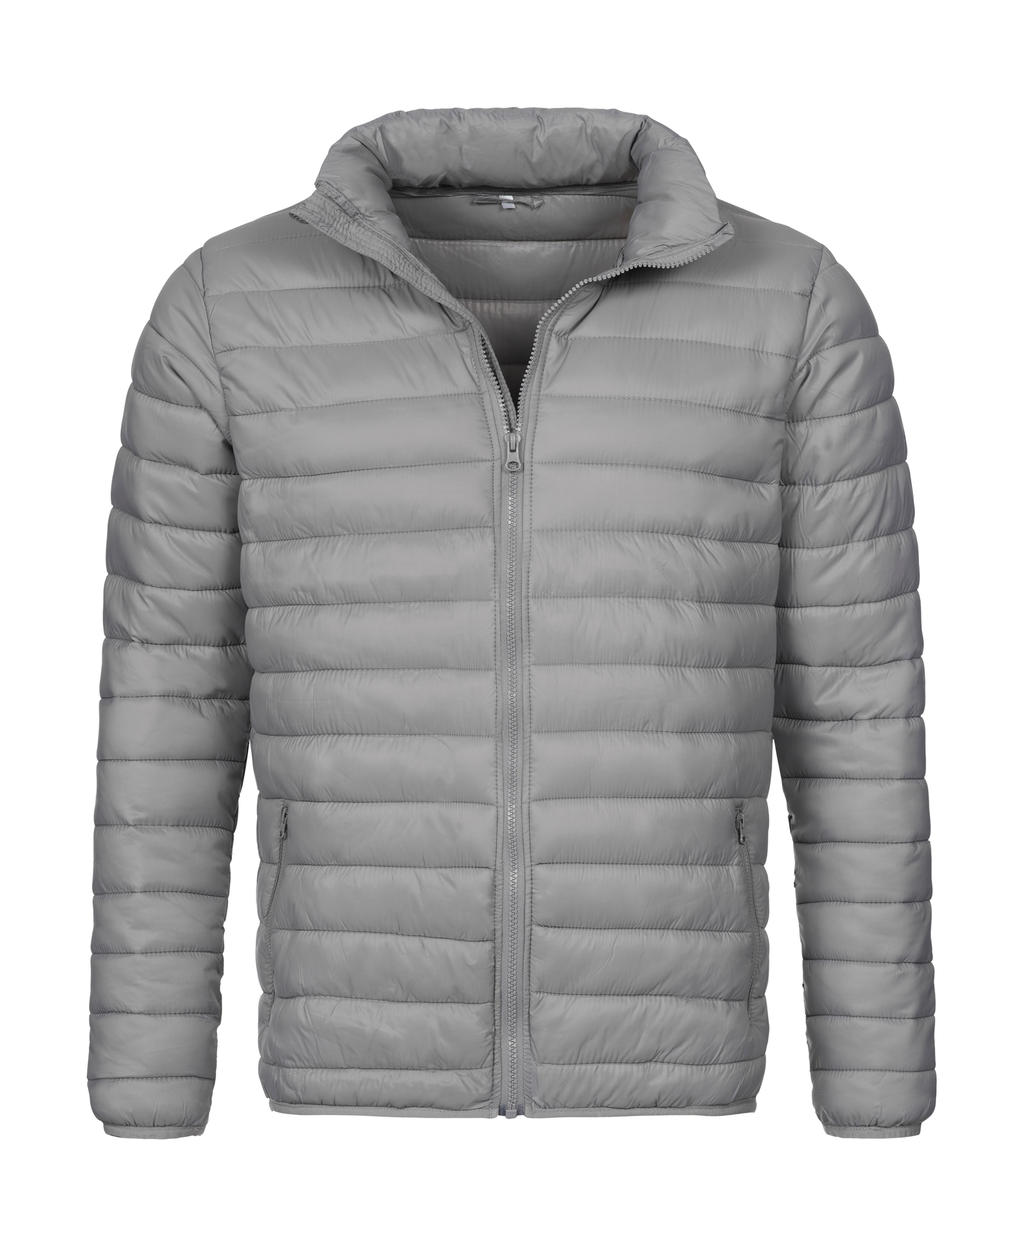  Padded Jacket in Farbe Light Grey